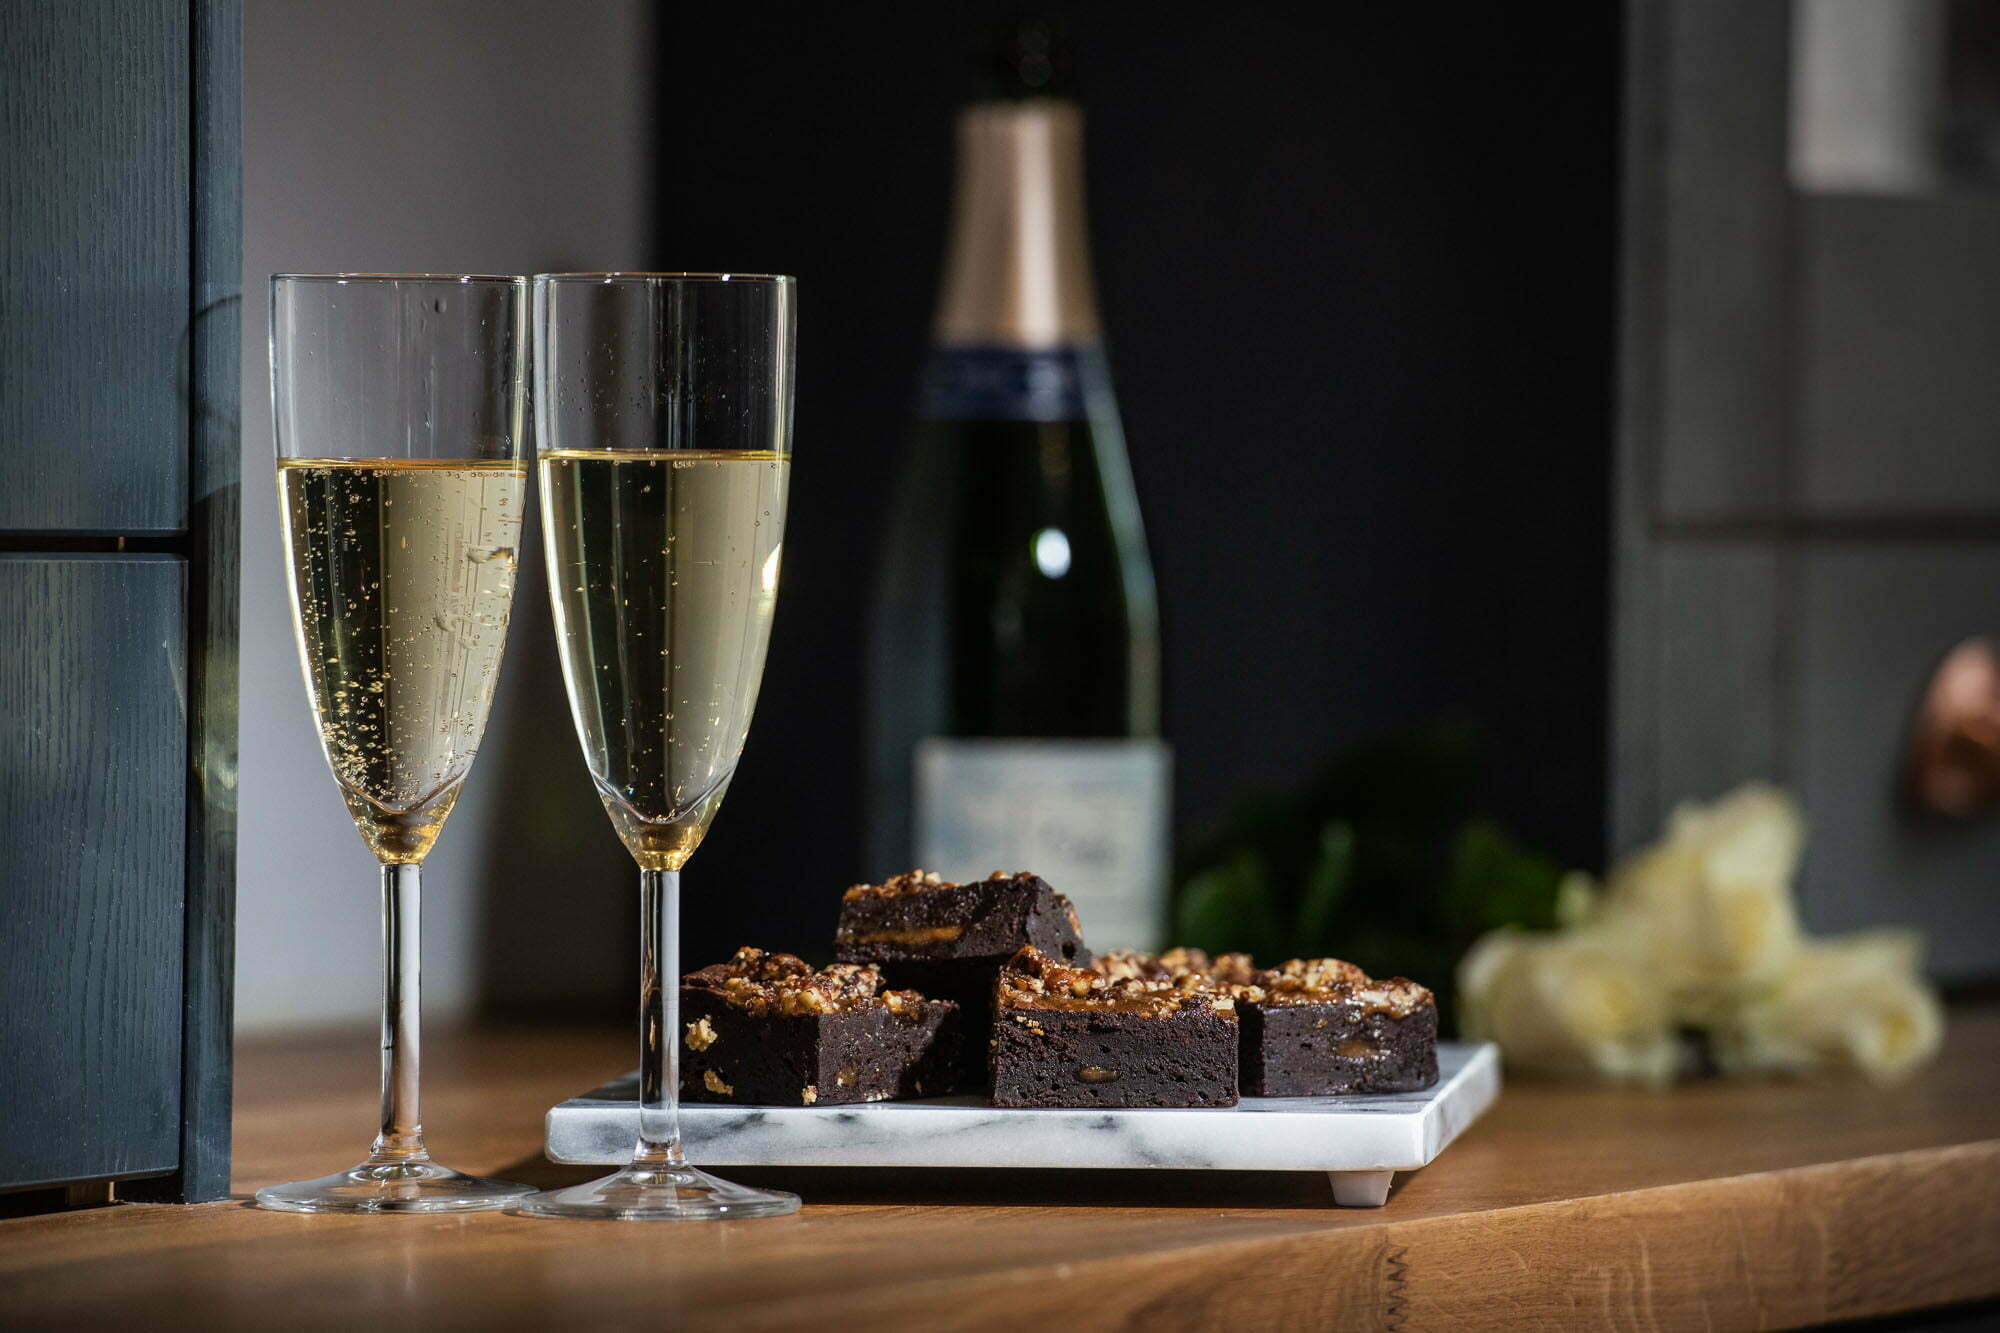 Brownies on a plate with two flutes of champagne and a bottle of champagne in the background. There are also white roses to the right of the bottle and brownies, indicating a wedding scene.